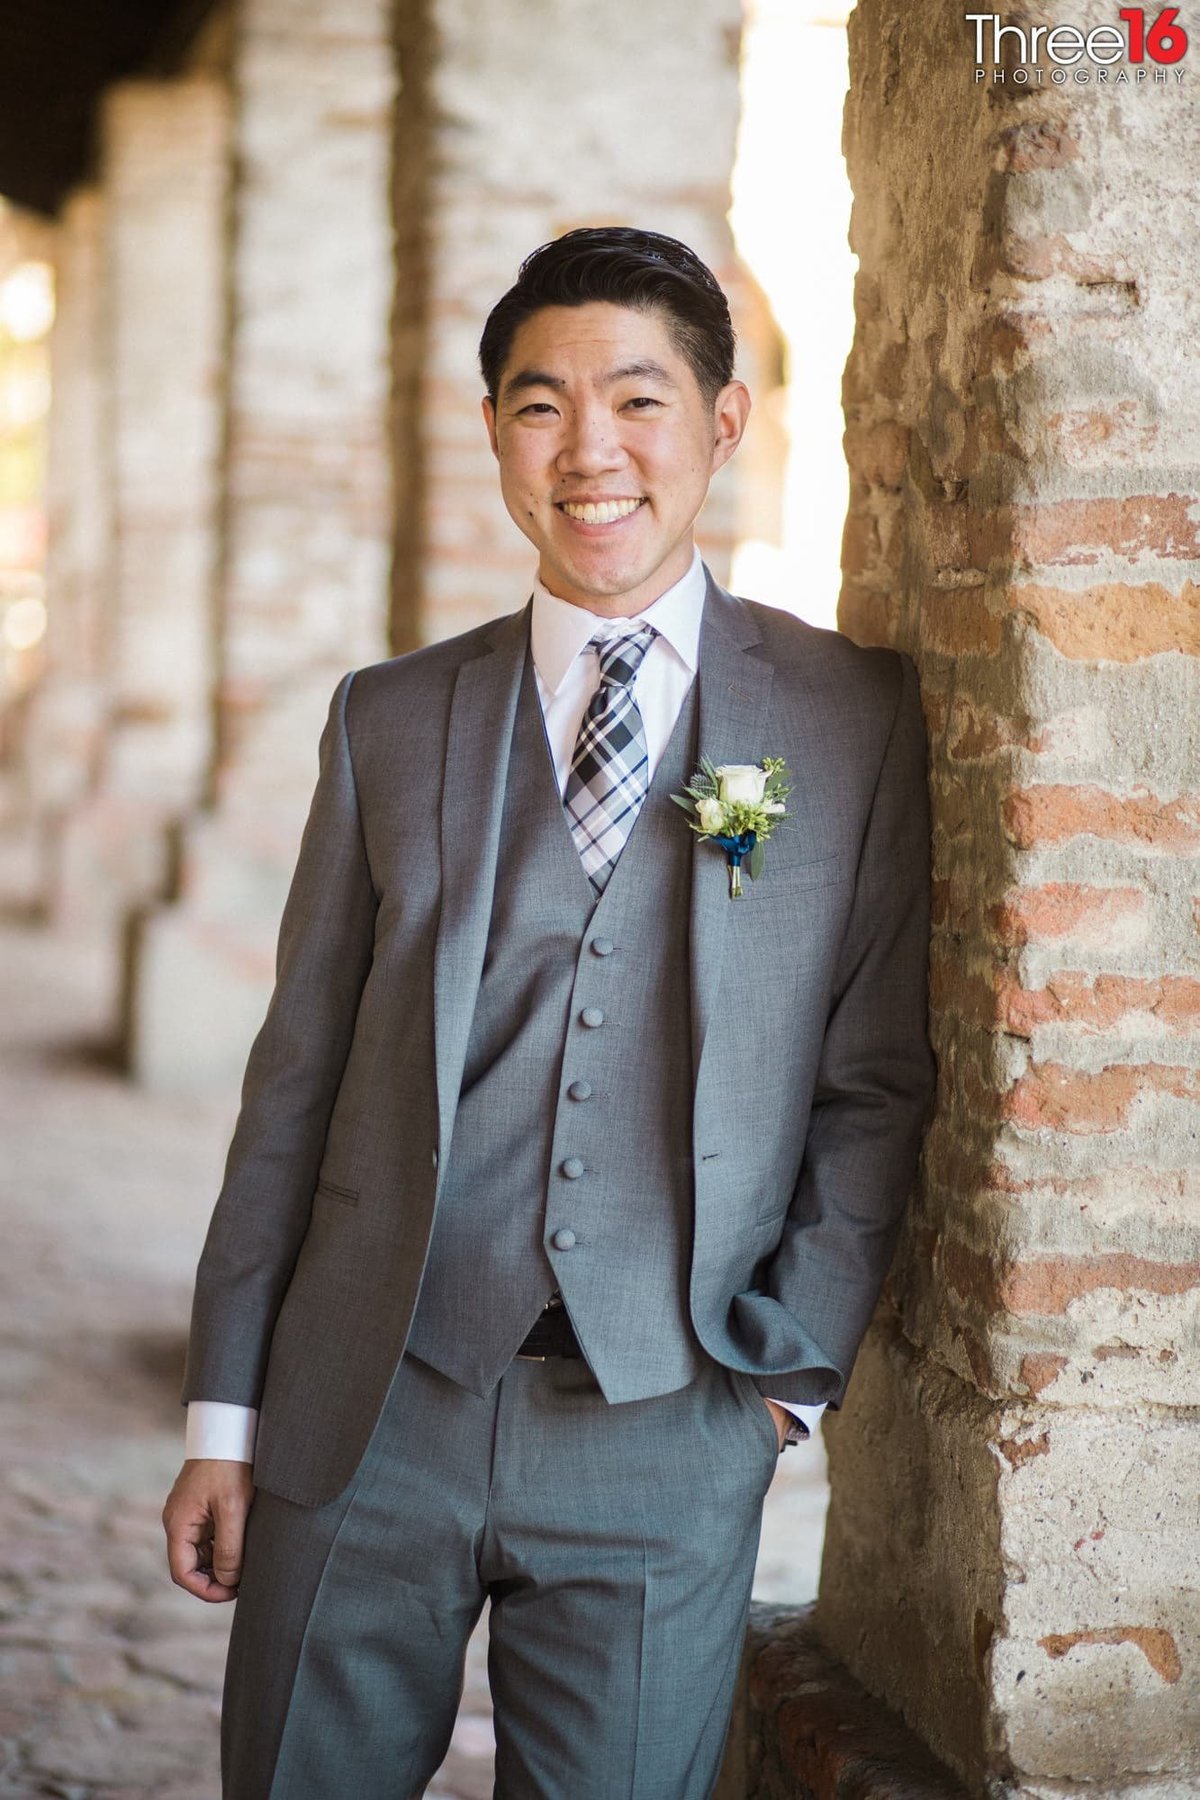 Big grin by the Groom as he leans against the brick pillar